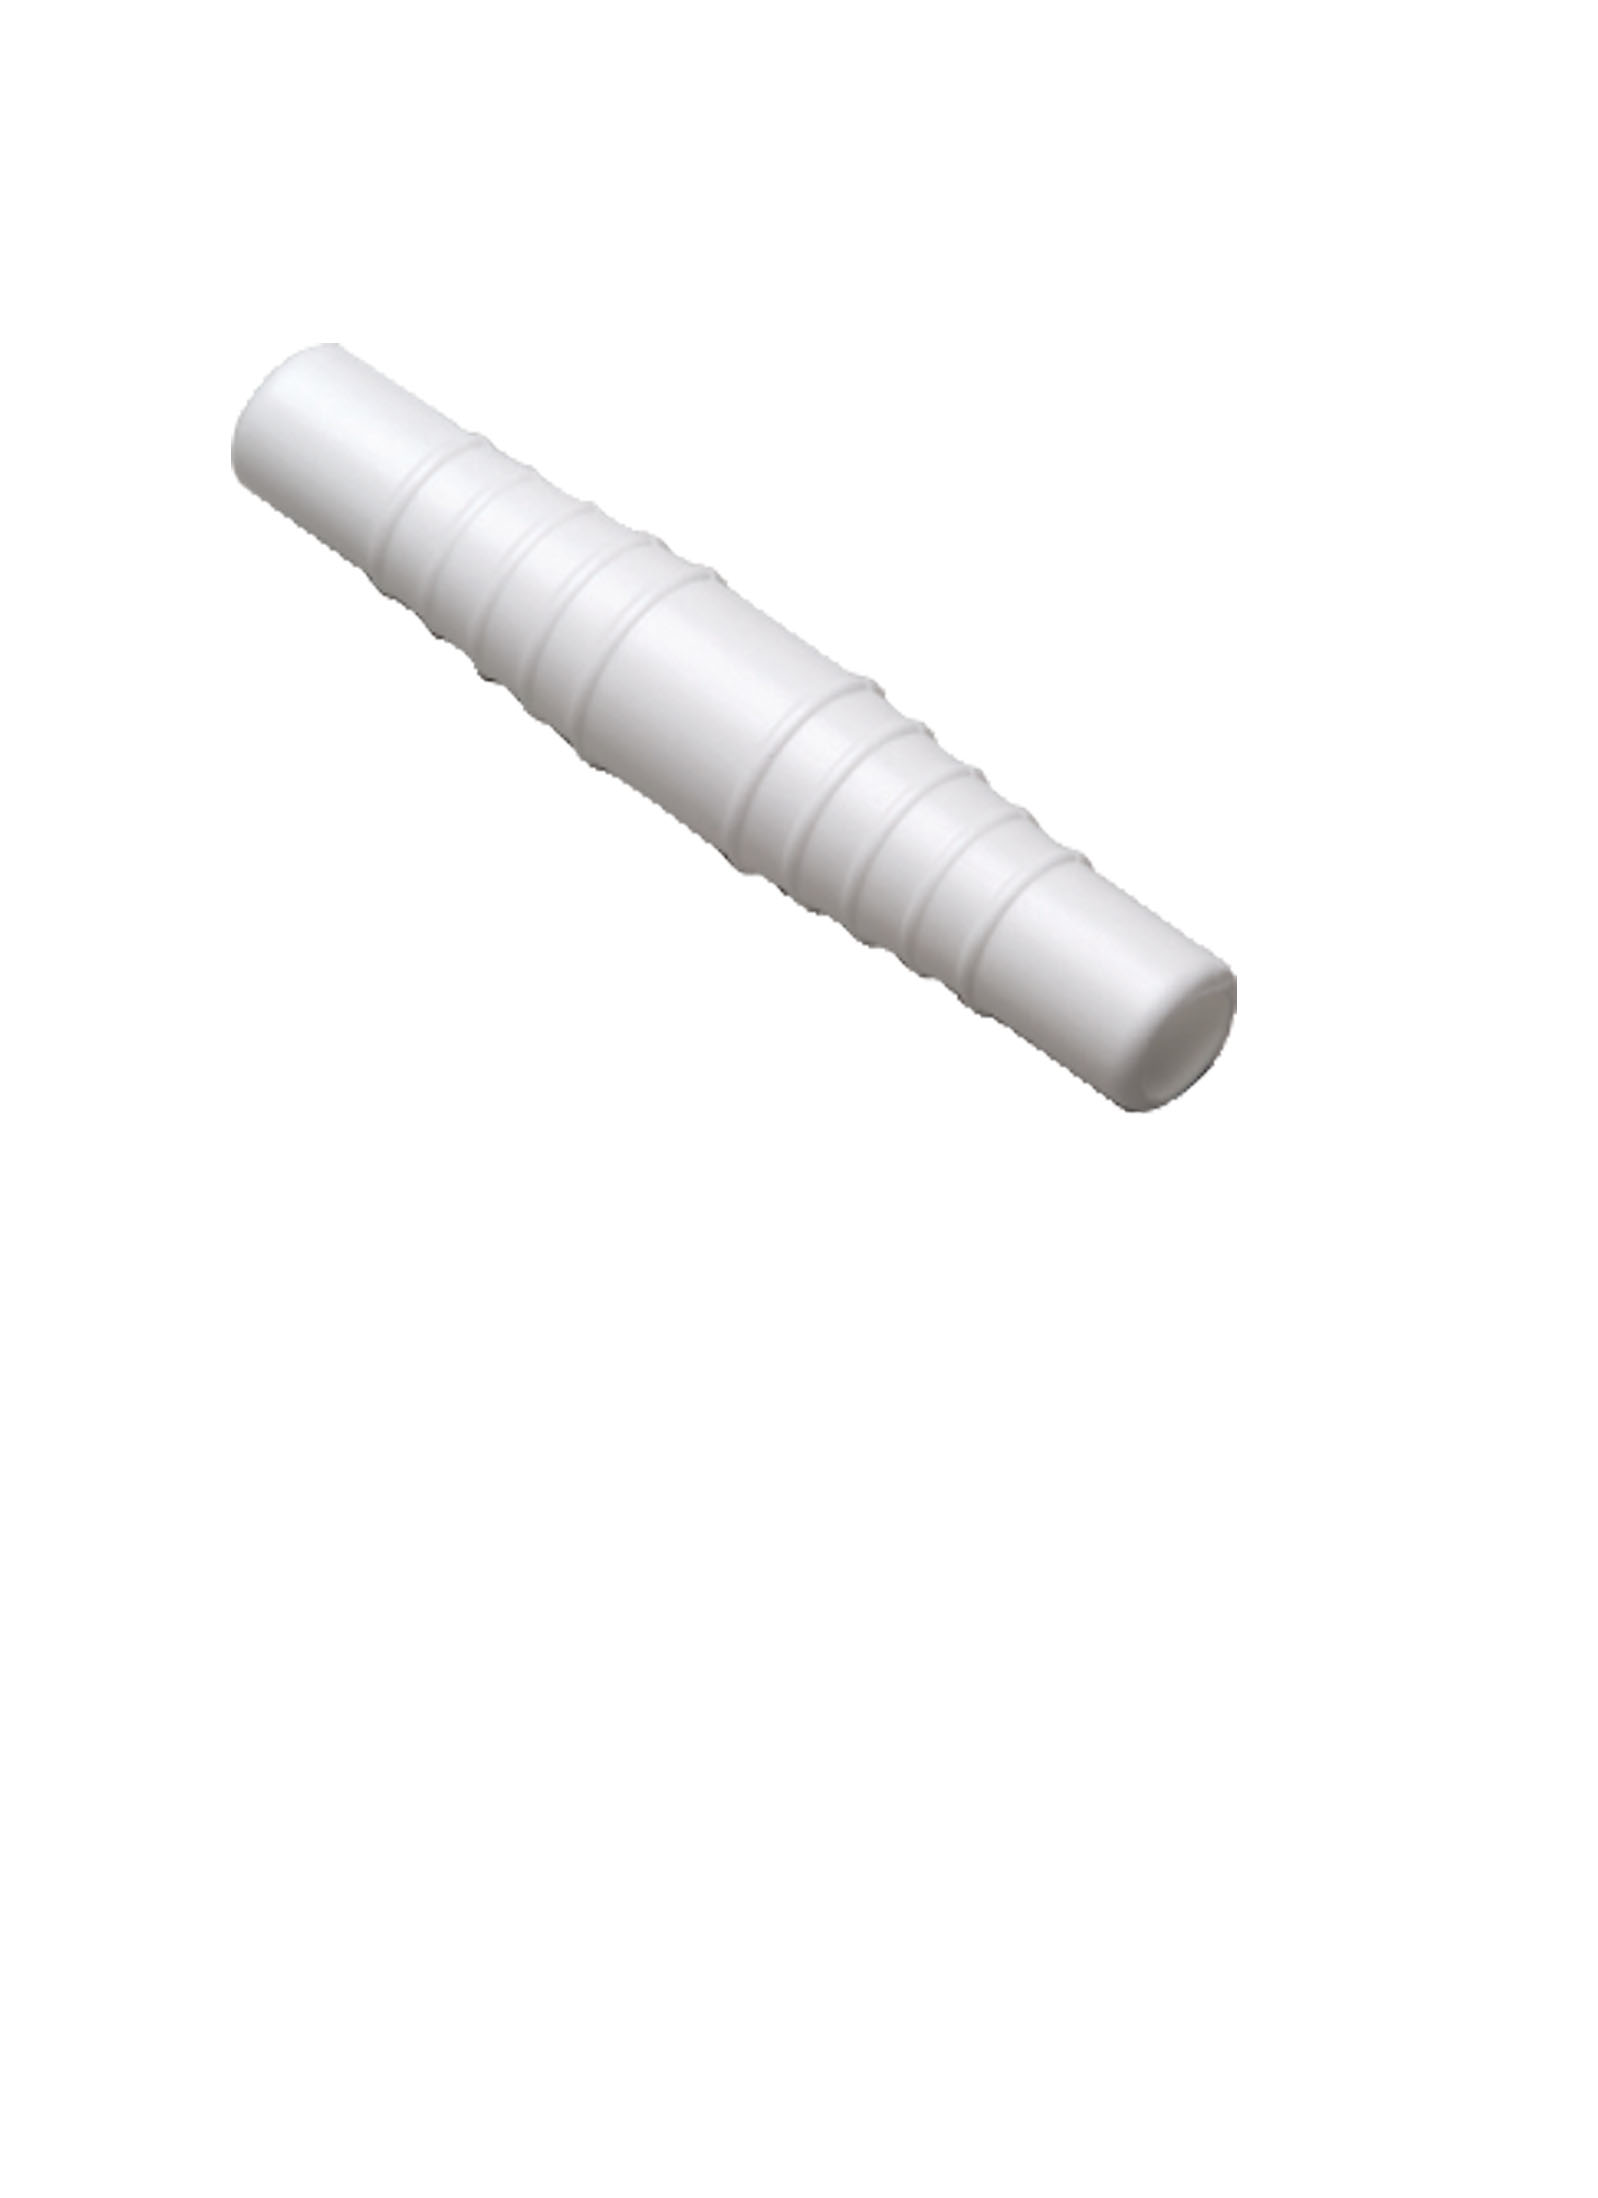 Hose Connector 175101 - UNDEFINED